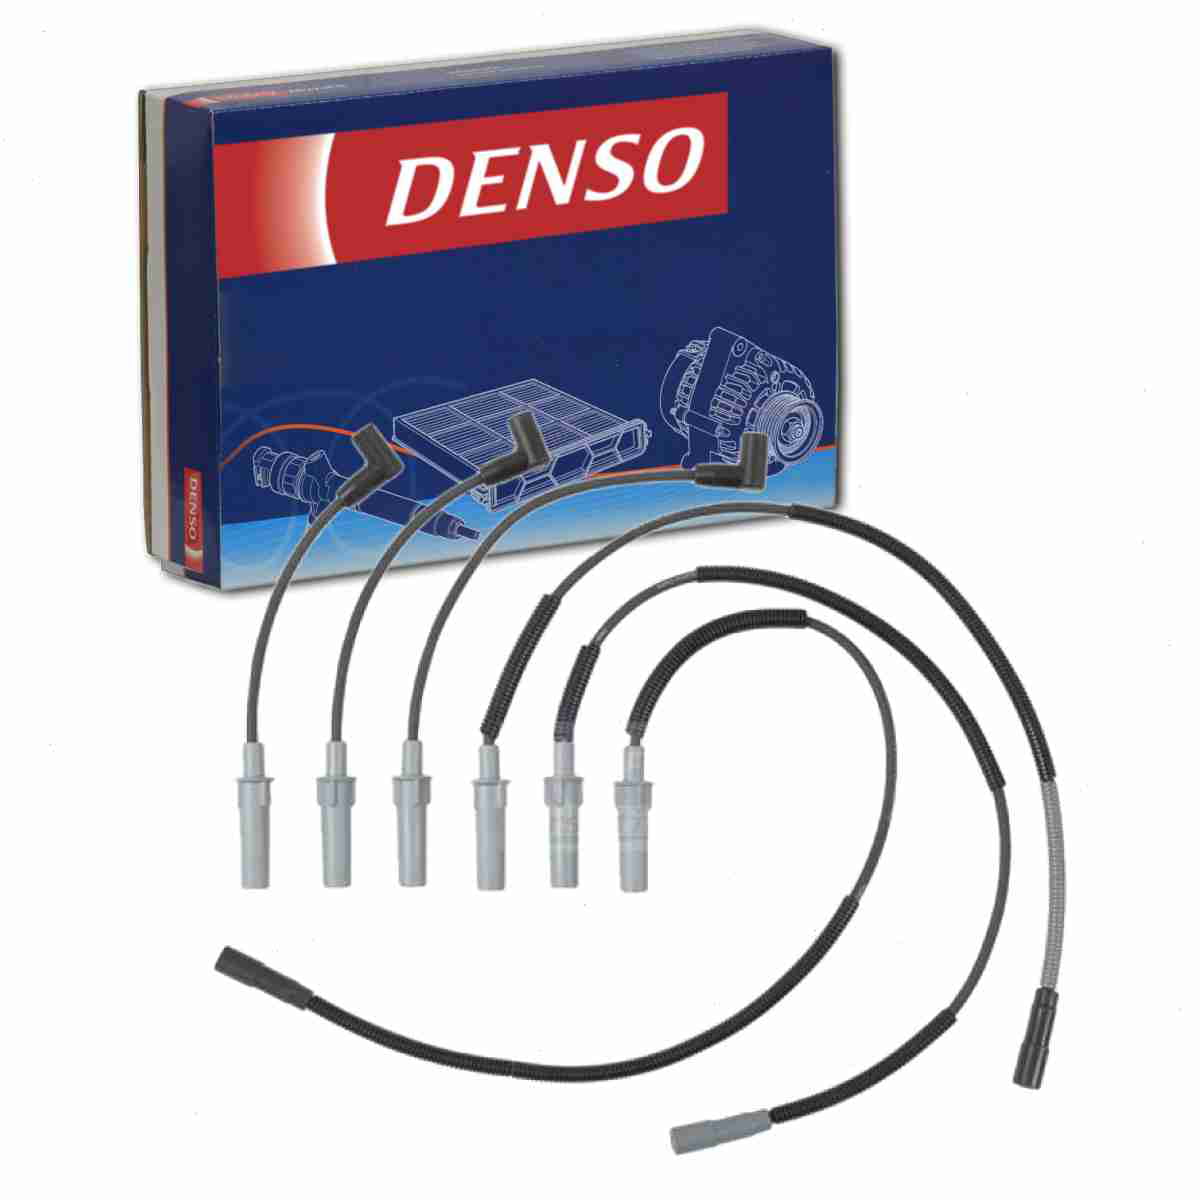 DENSO Spark Plug Wire Set compatible with Jeep Wrangler  V6 2007-2011 Ignition  Plugs Coils 